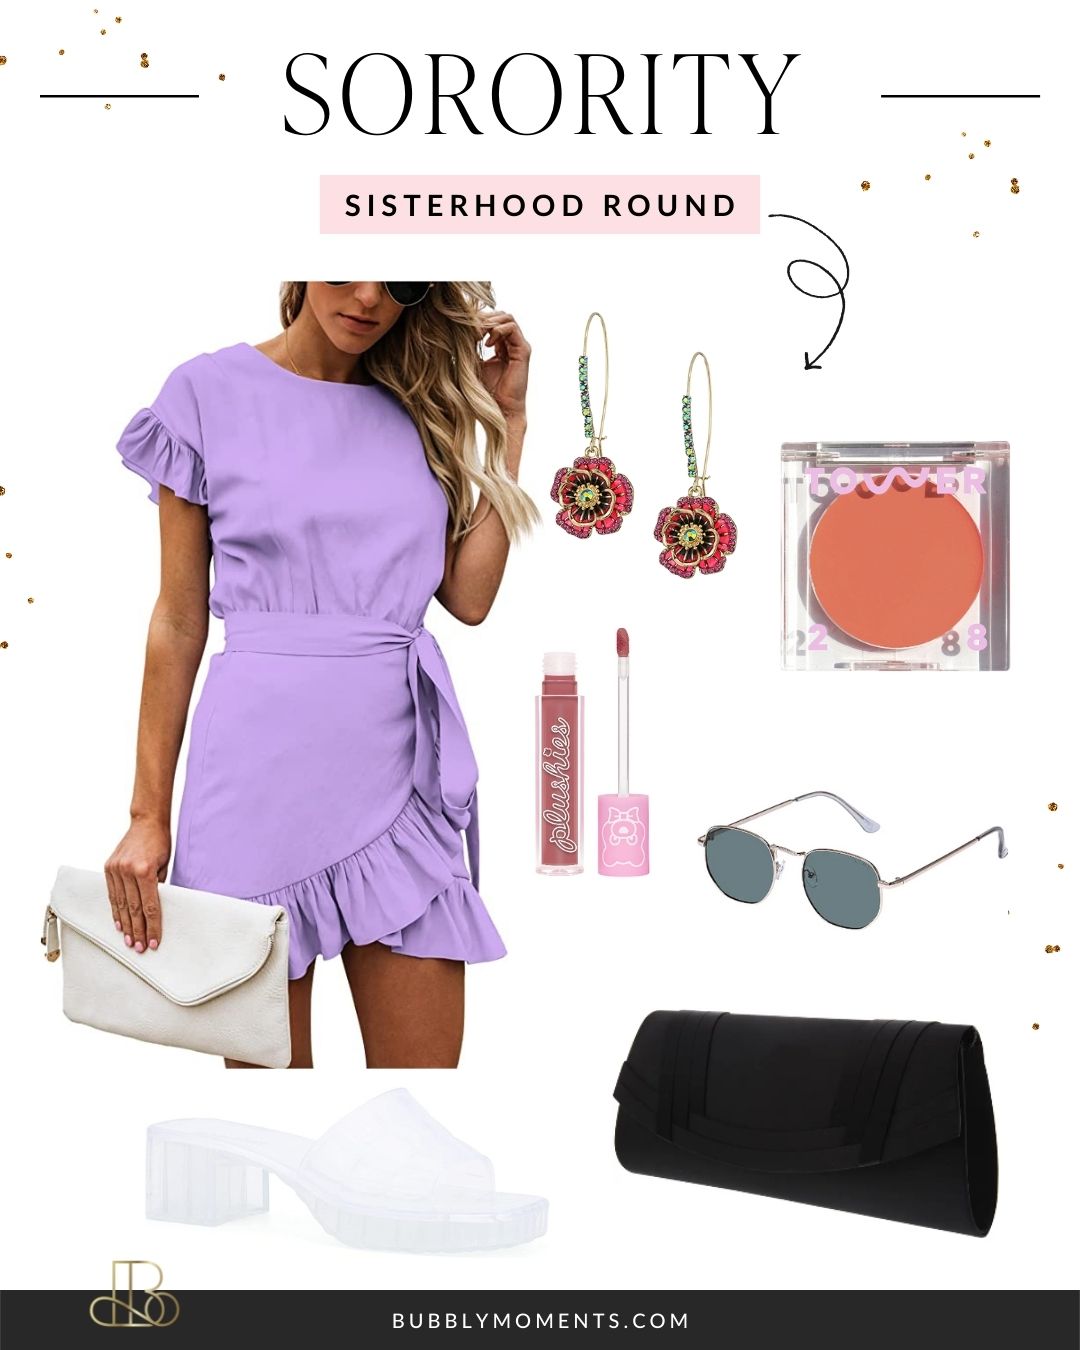 Sorority Recruitment Outfits | Sorority Rush Week Outfits | Sisterhood Round Outfits | Bubbly Moments